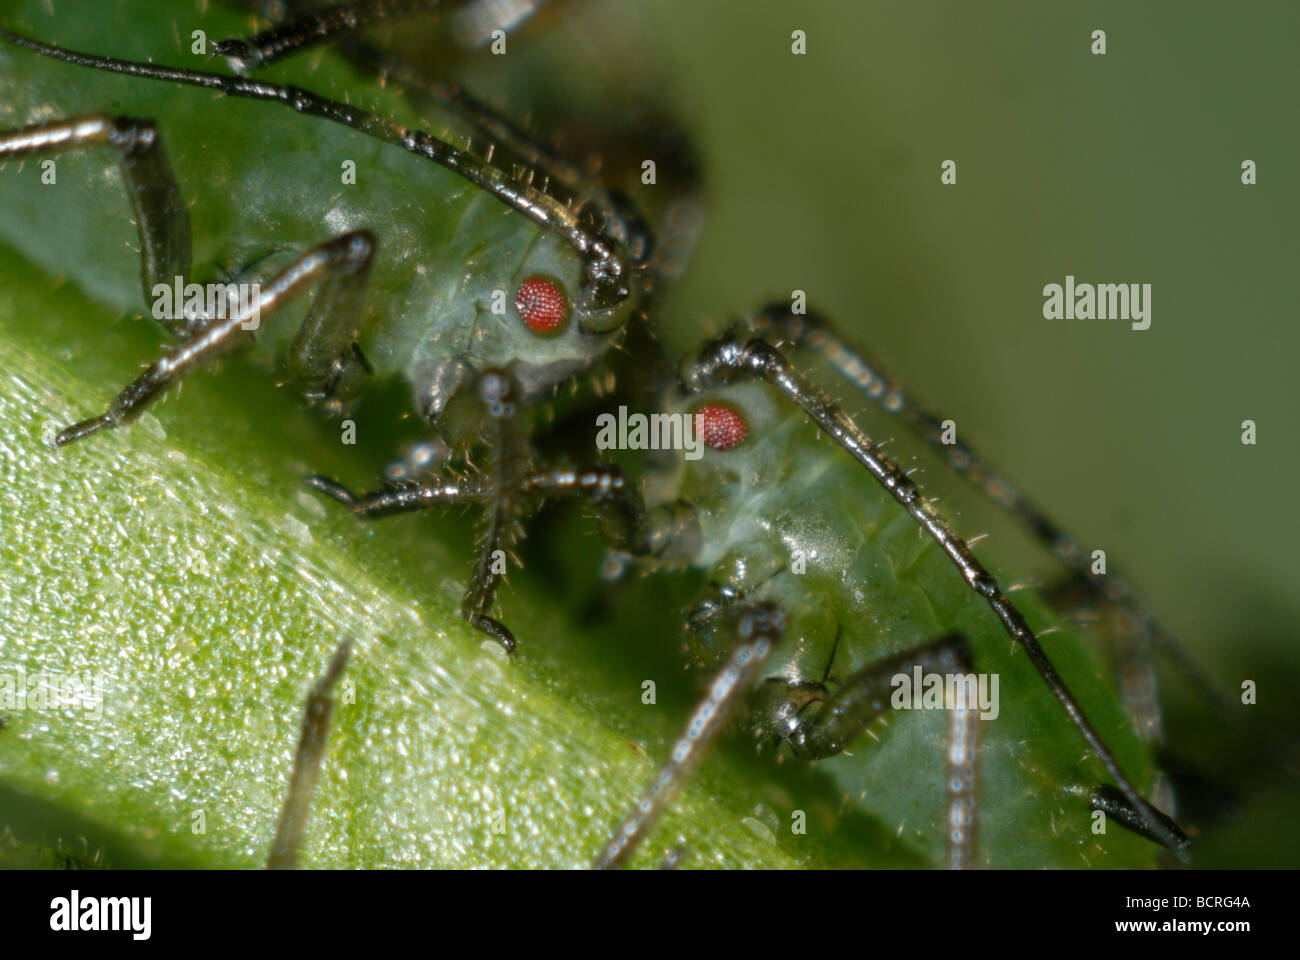 Vetch aphid Megoura viciae juvenile aphids head to head stylets eyes antennae Stock Photo